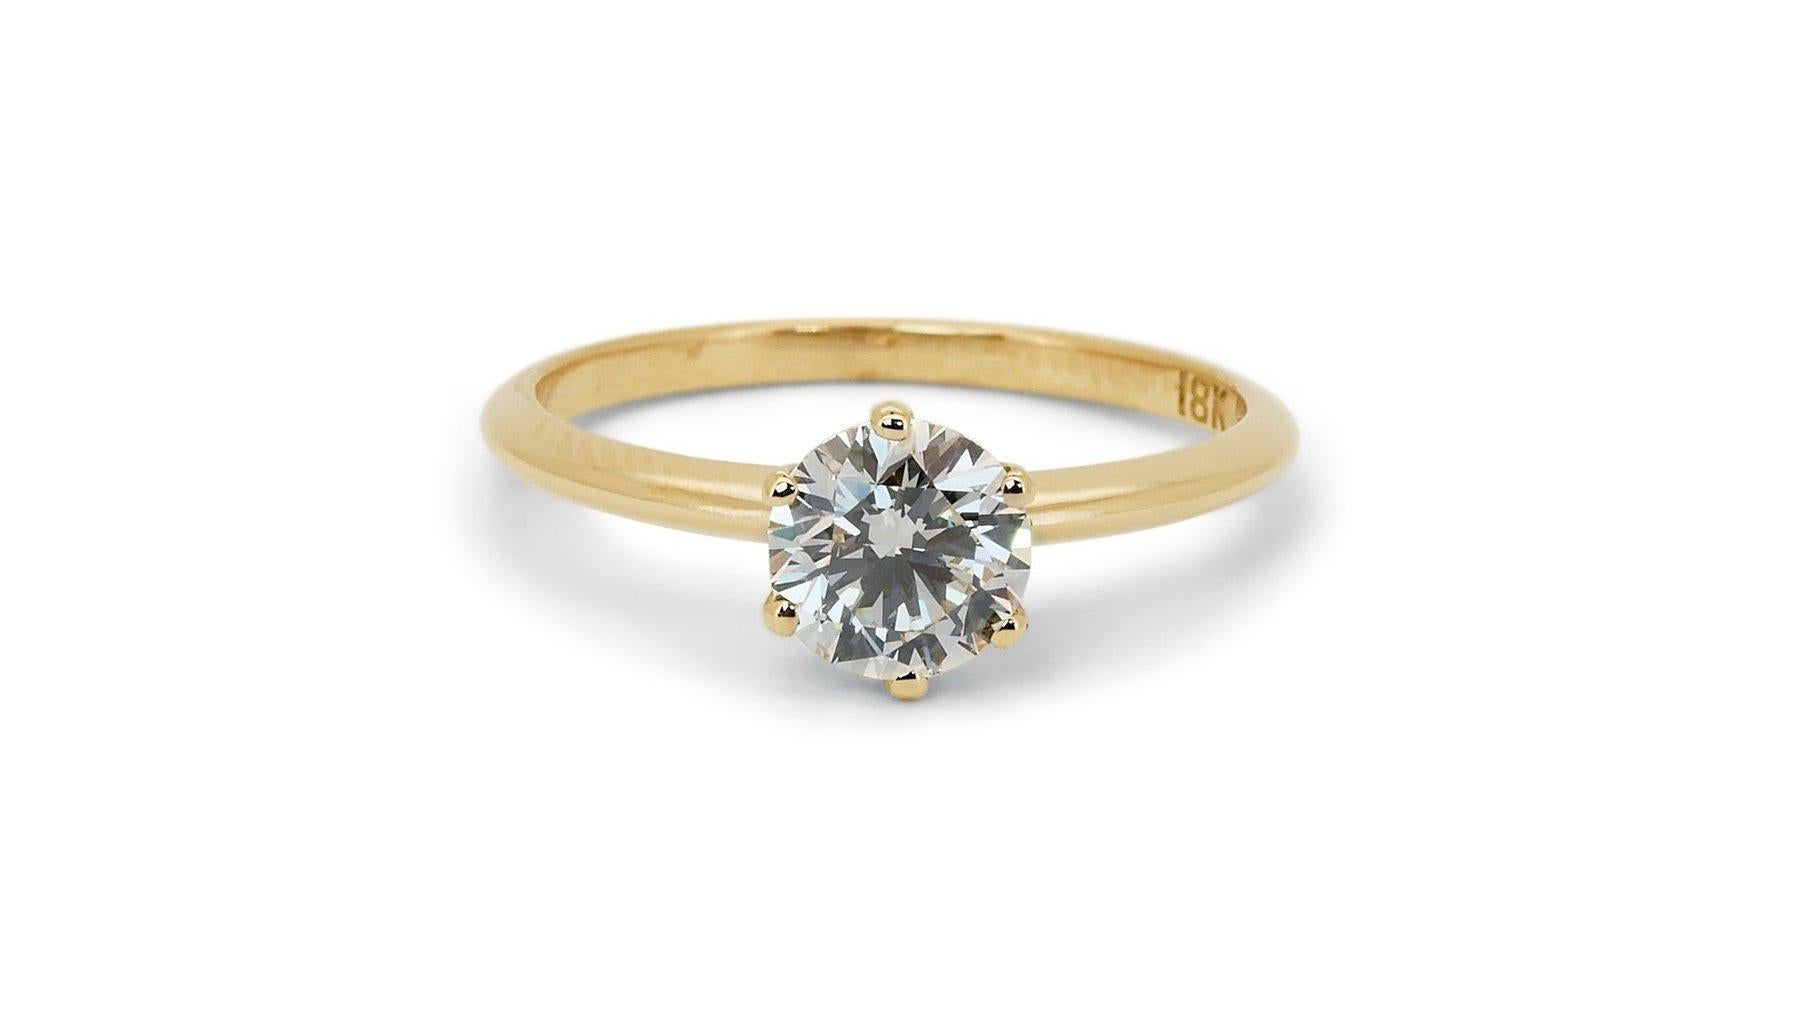 Lustrous 1.07ct Diamond Solitaire Ring in 18k Yellow Gold - GIA Certified For Sale 3